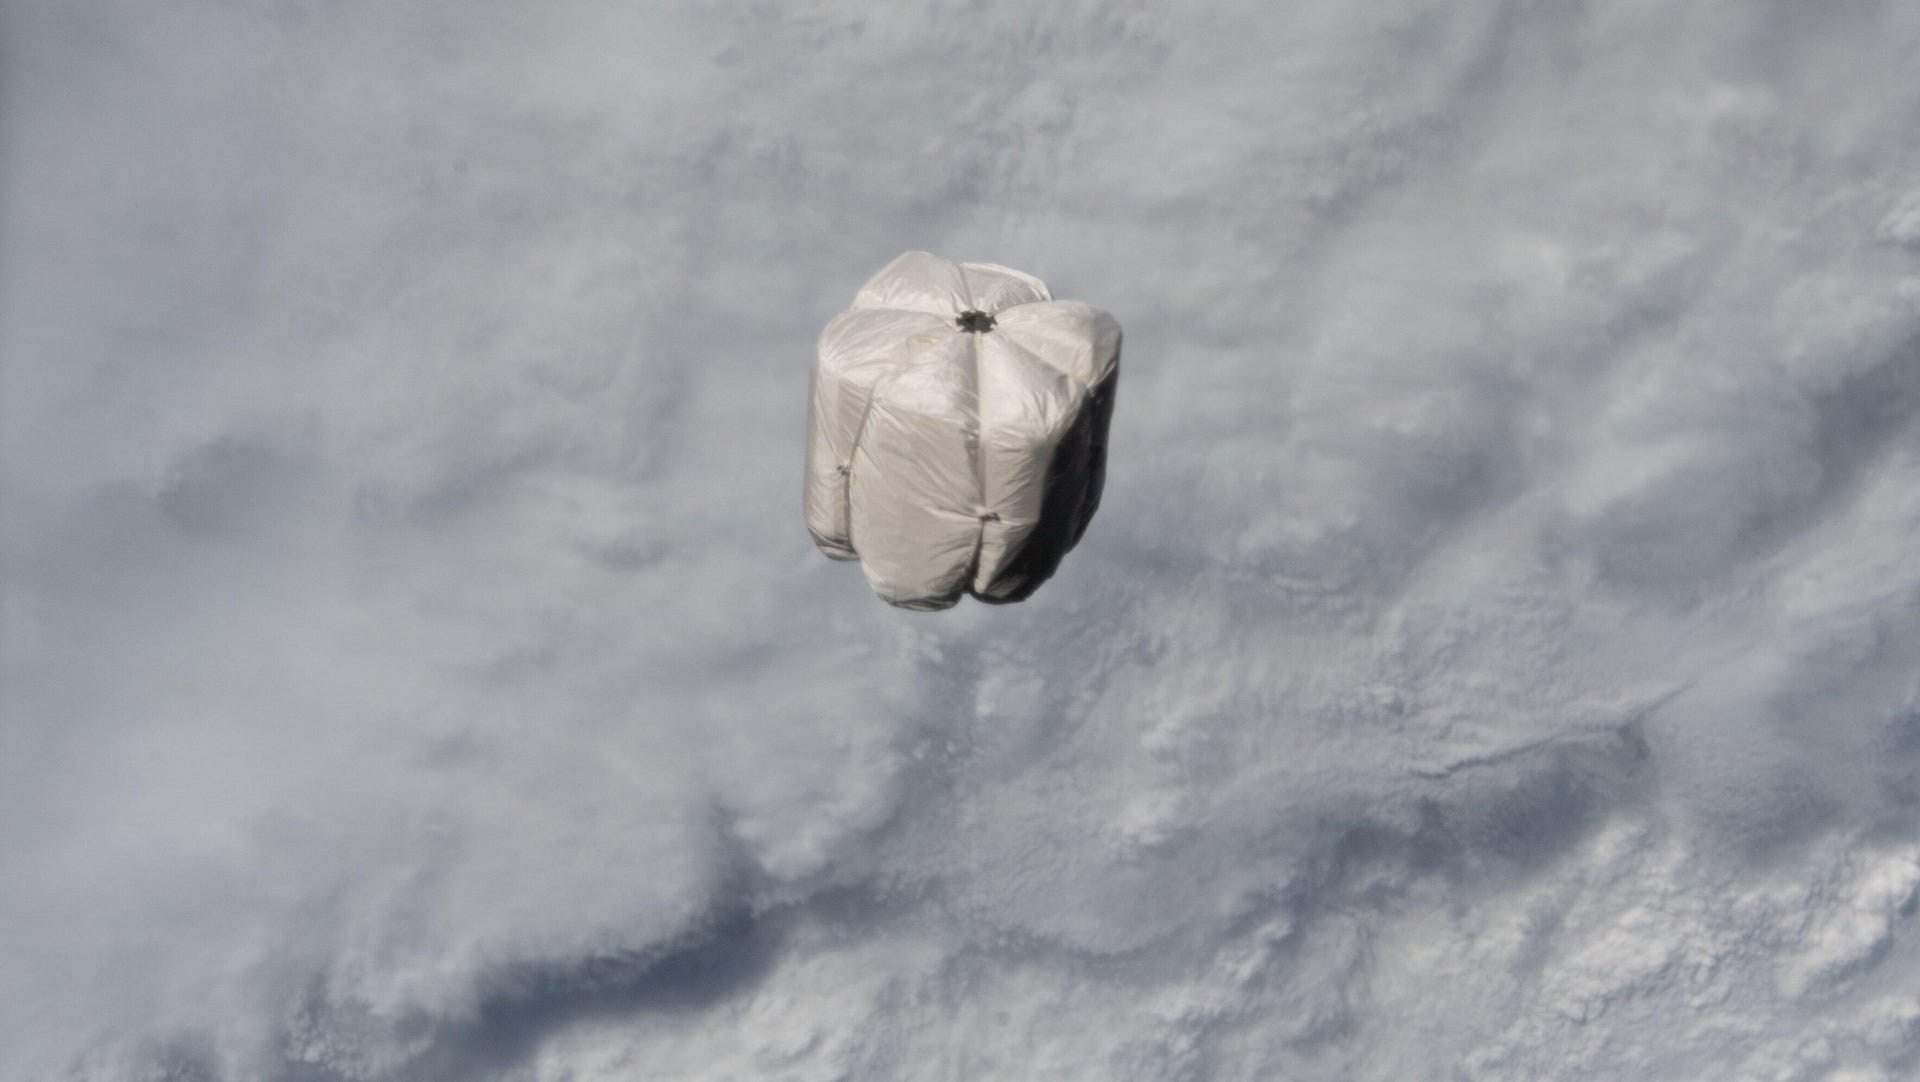 A trash bag floats in orbit above the clouds of Earth.